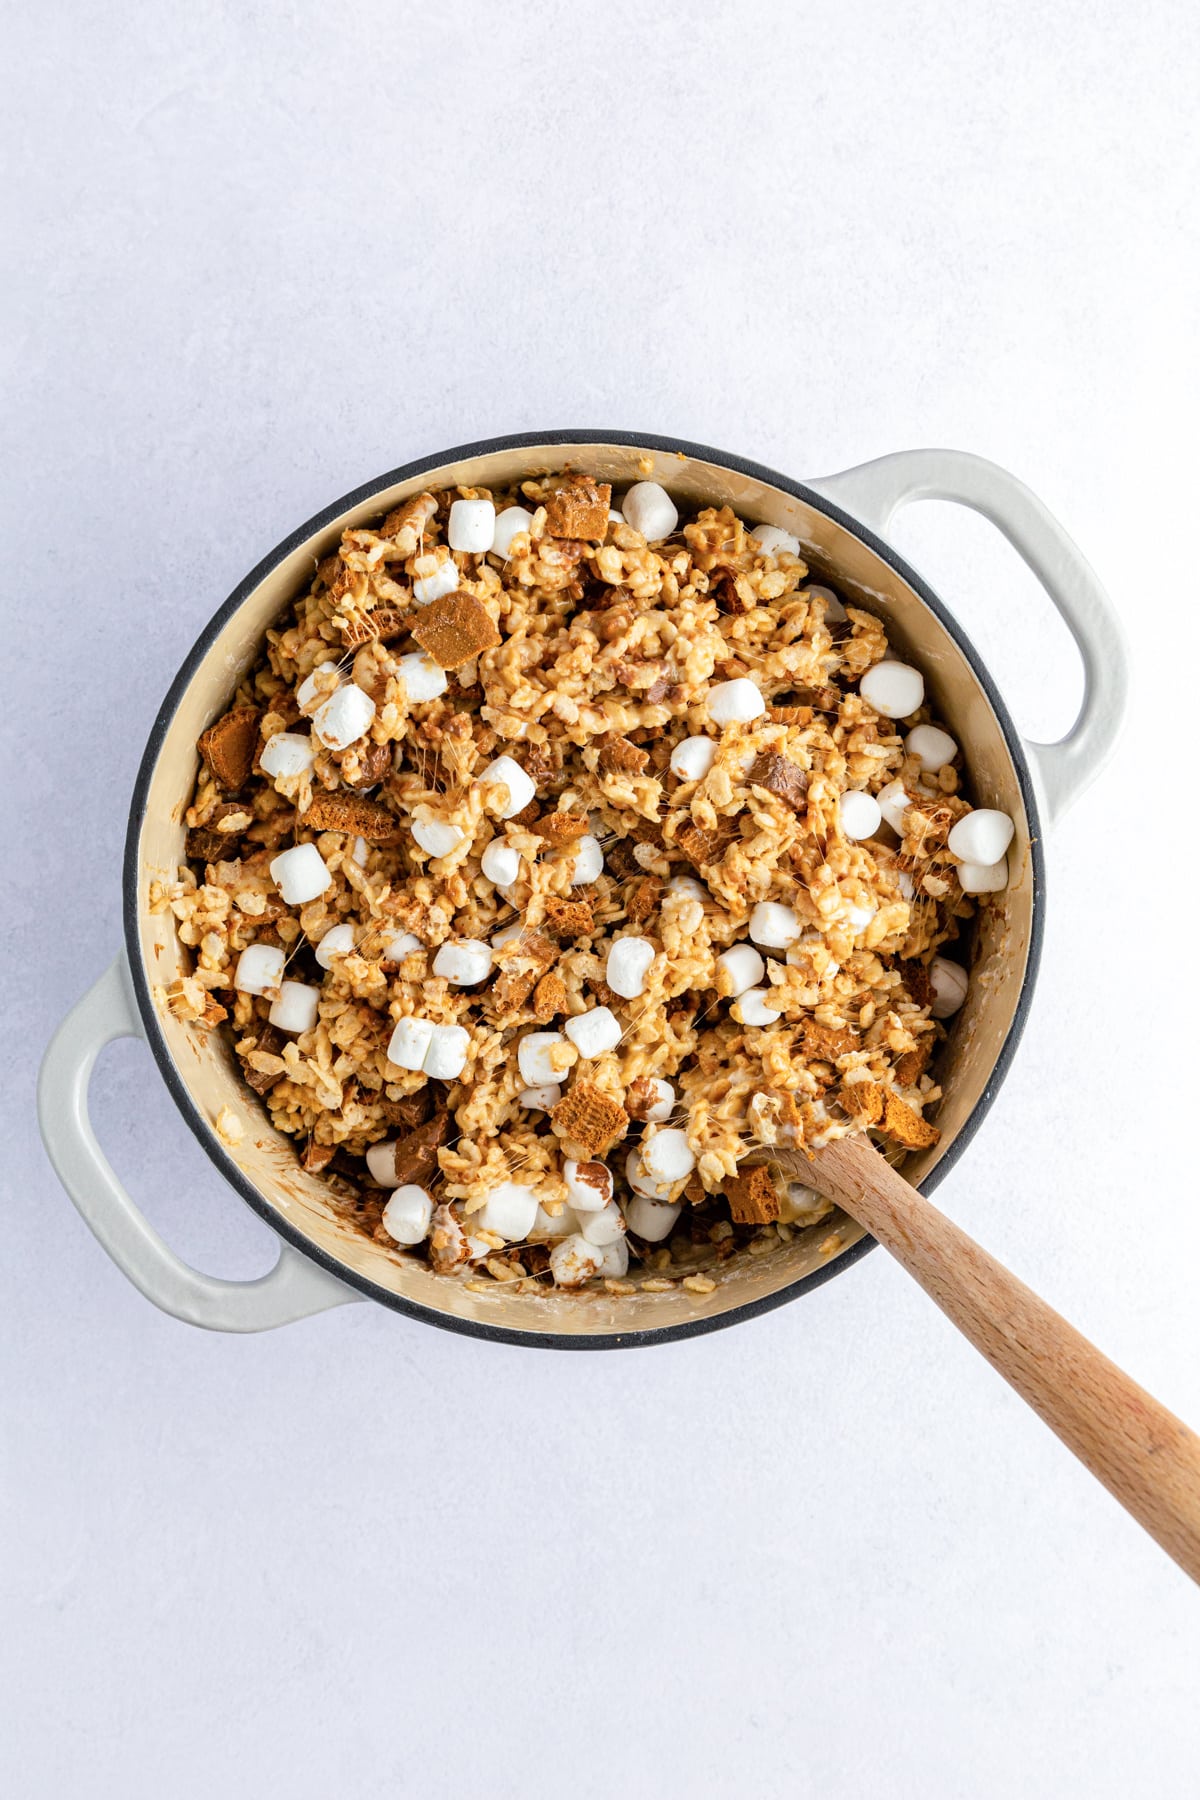 stir in reserved mini marshmallows to cereal treats in pot